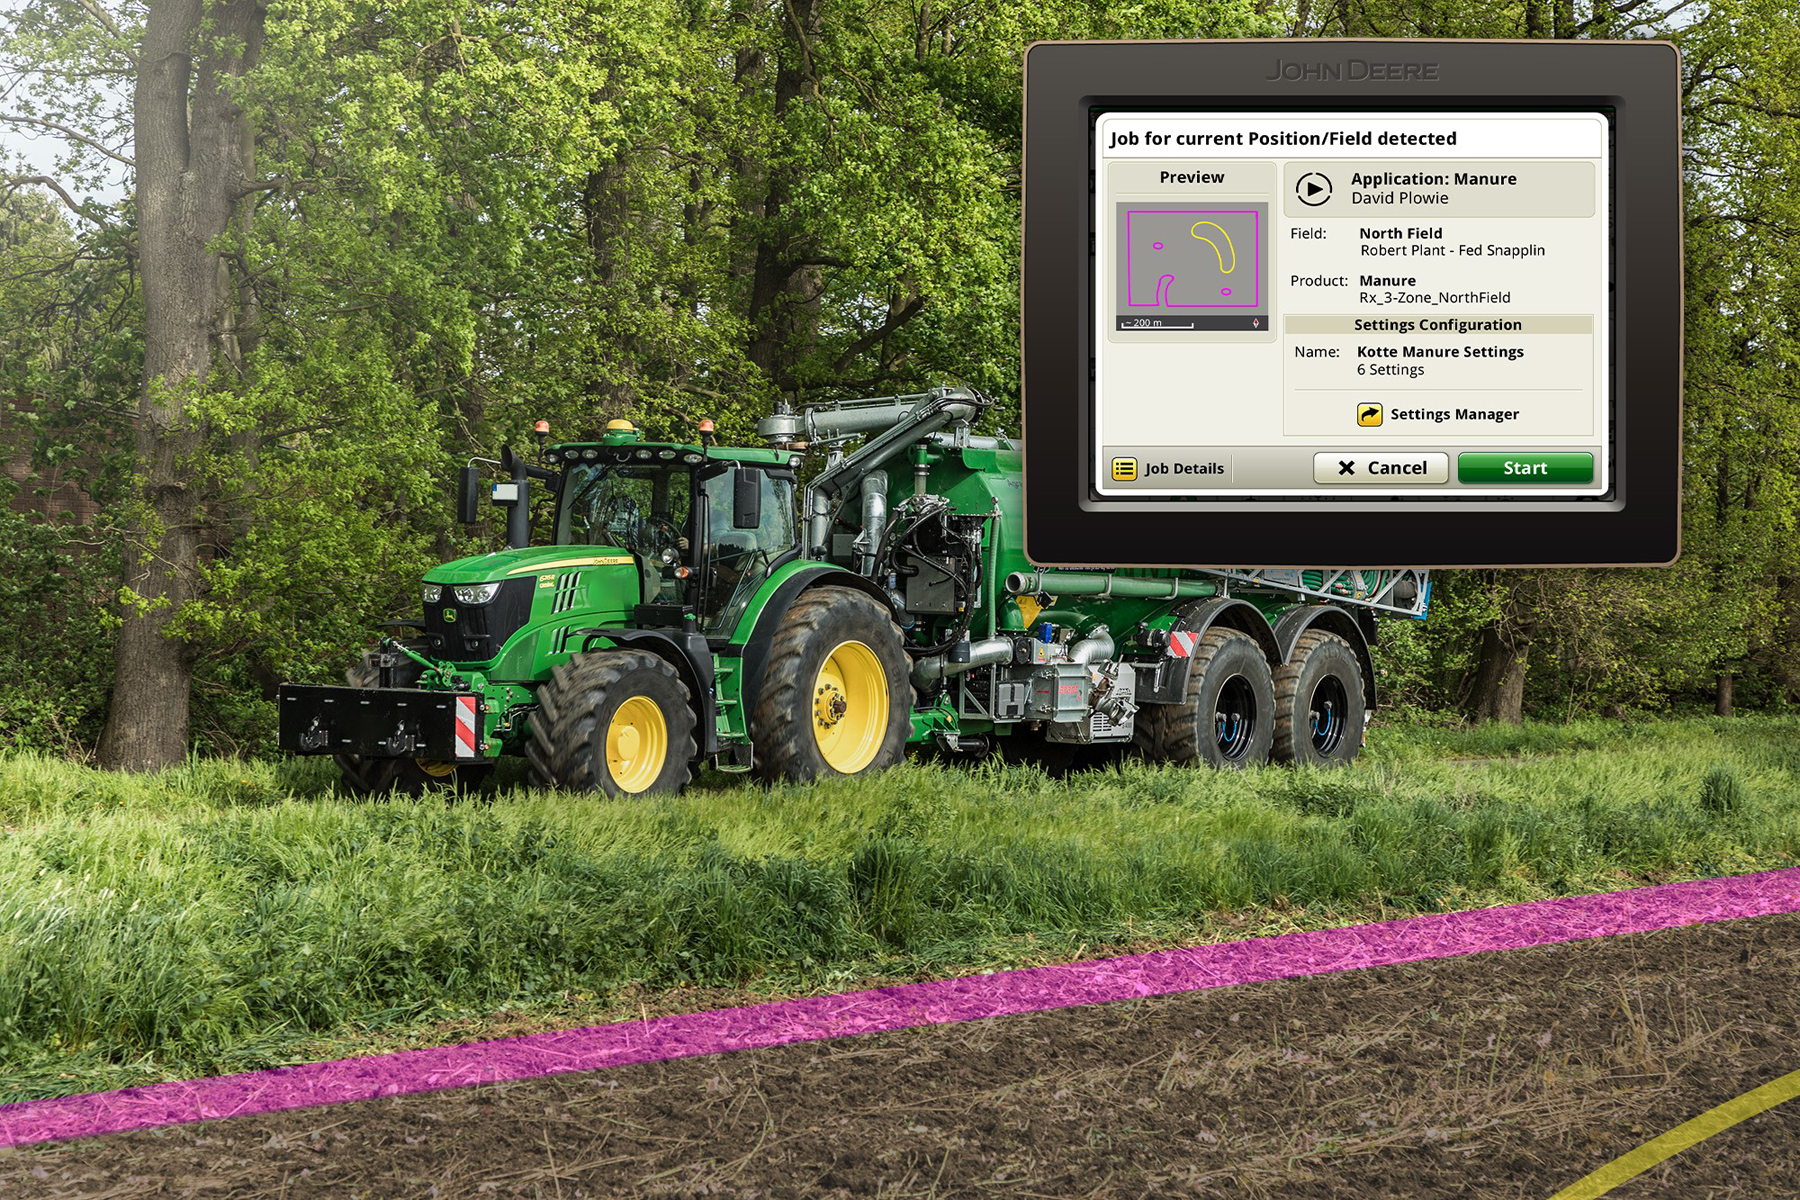 Set up your tractor and implement with one click